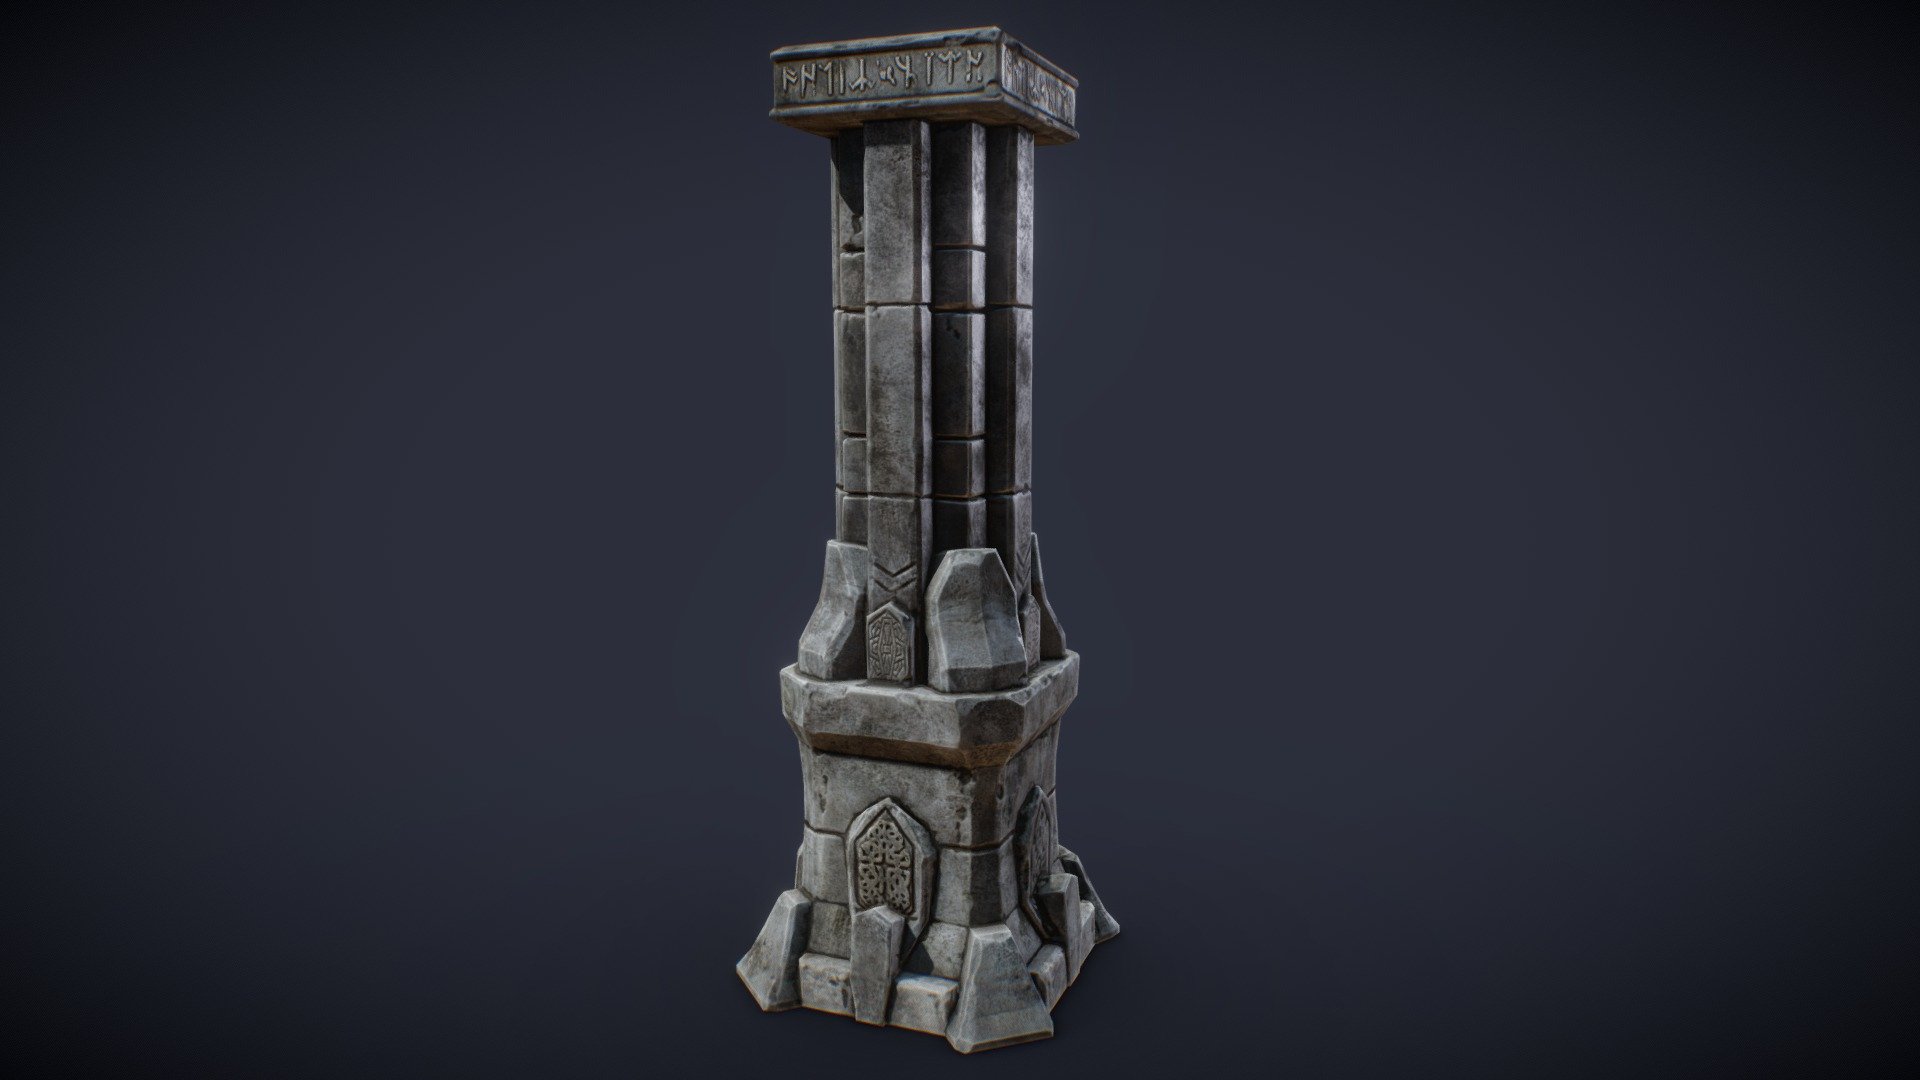 From the game asset package, Dwarven Expedition Pack:

https://forum.unity.com/threads/dwarven-expedition-pack.503325/#post-3301266 - Dwarven Pillar B - 3D model by tobyfredson 3d model